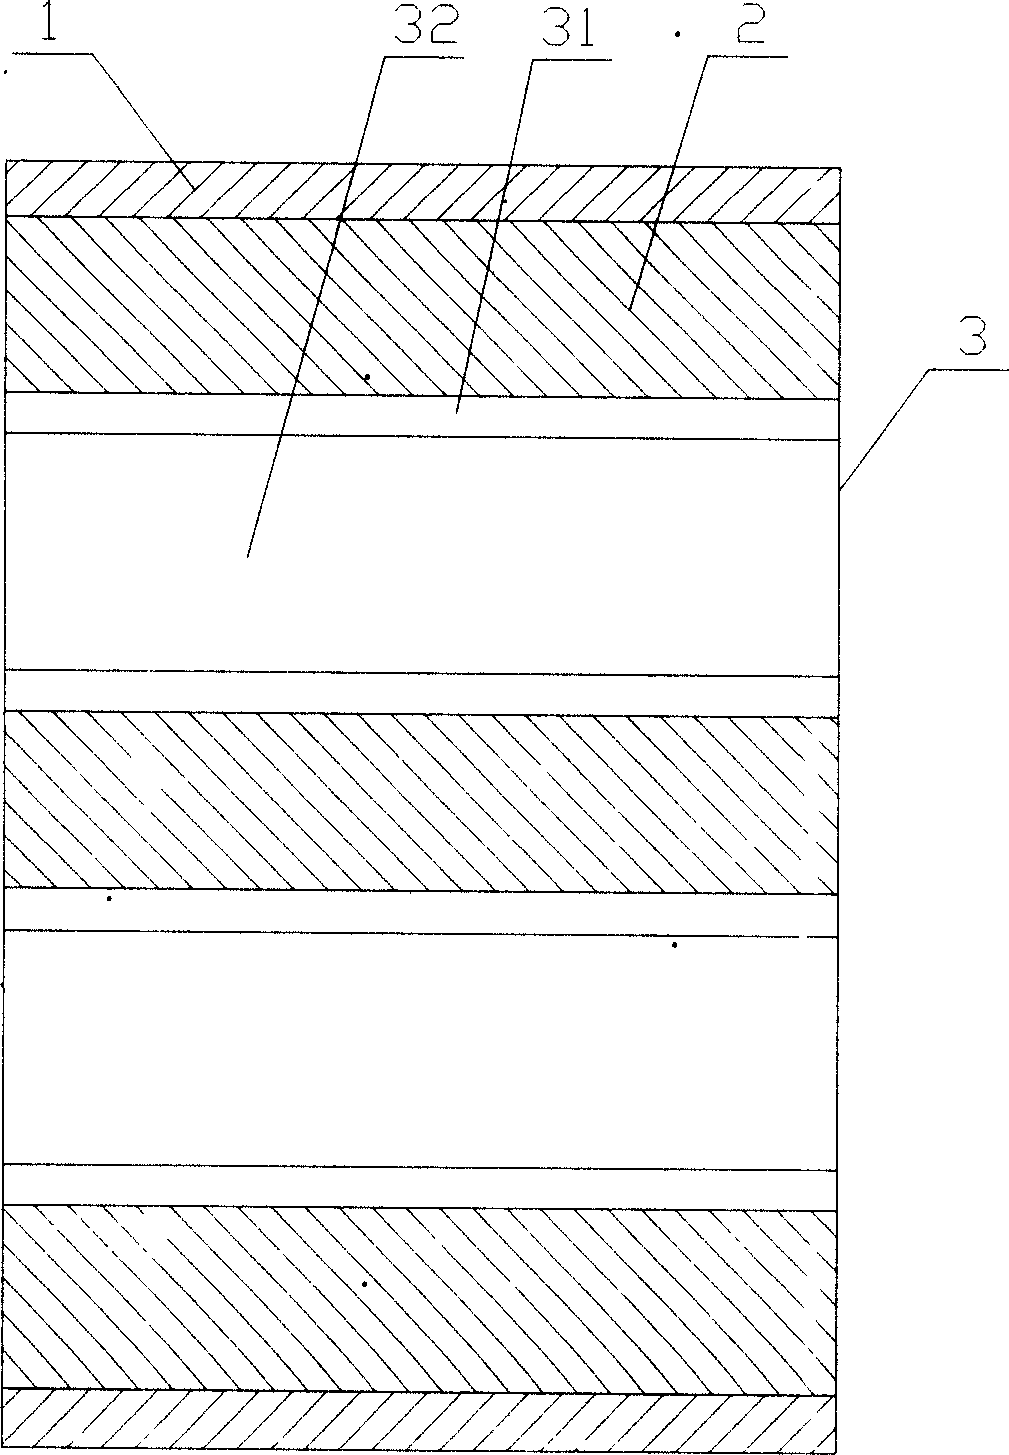 Laminated structure of printing circuit board and multi-laminate laminated structure